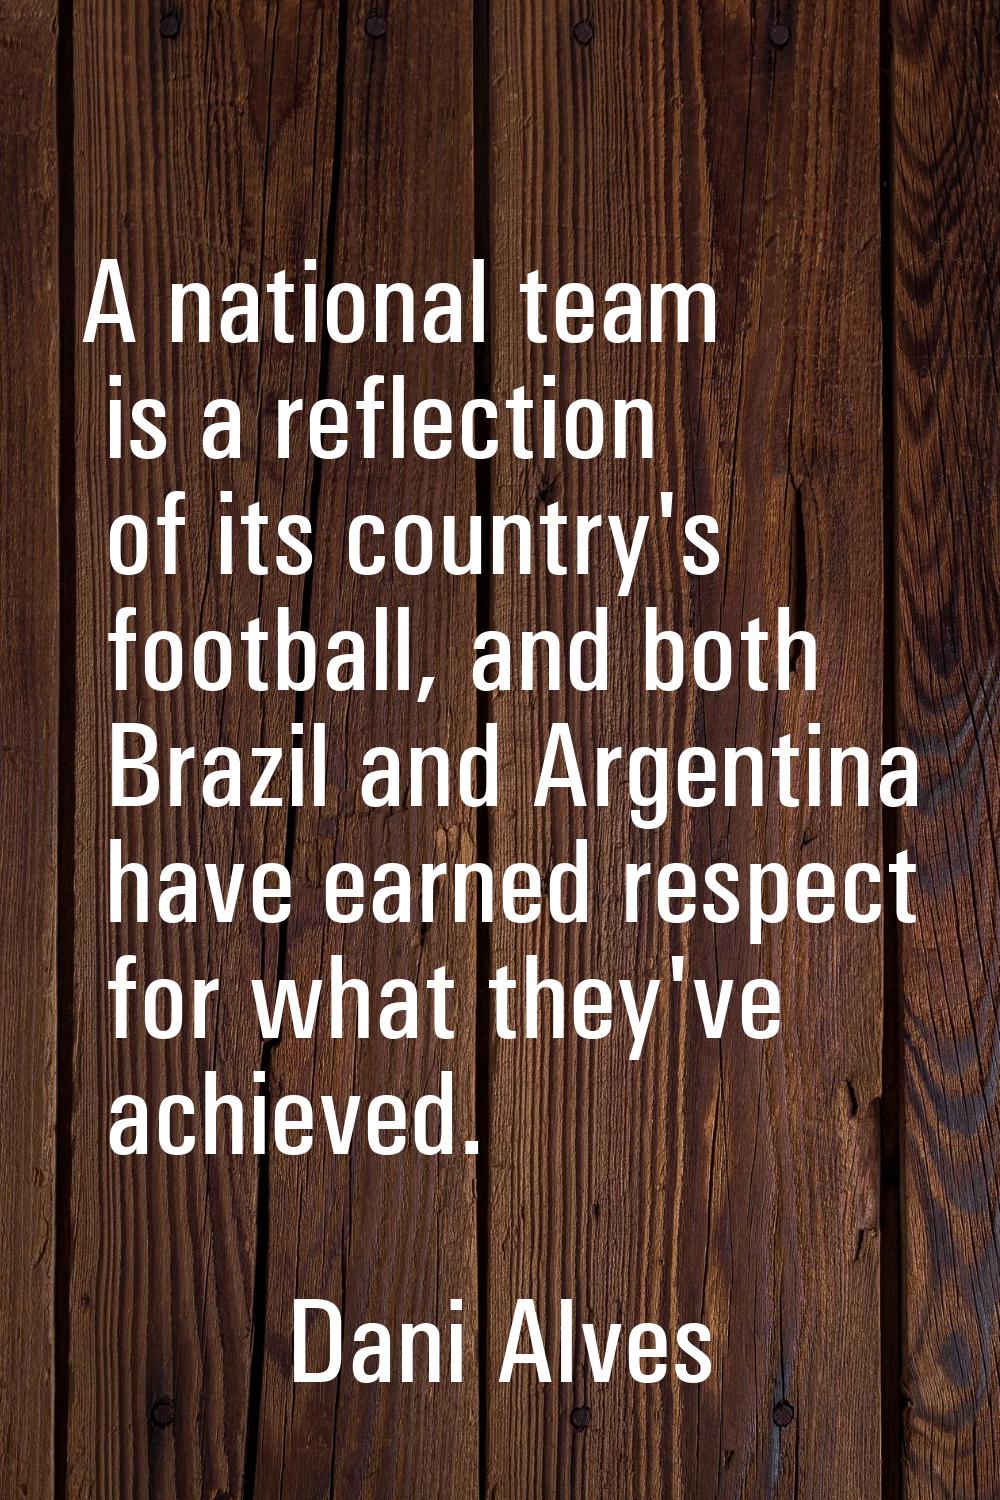 A national team is a reflection of its country's football, and both Brazil and Argentina have earne